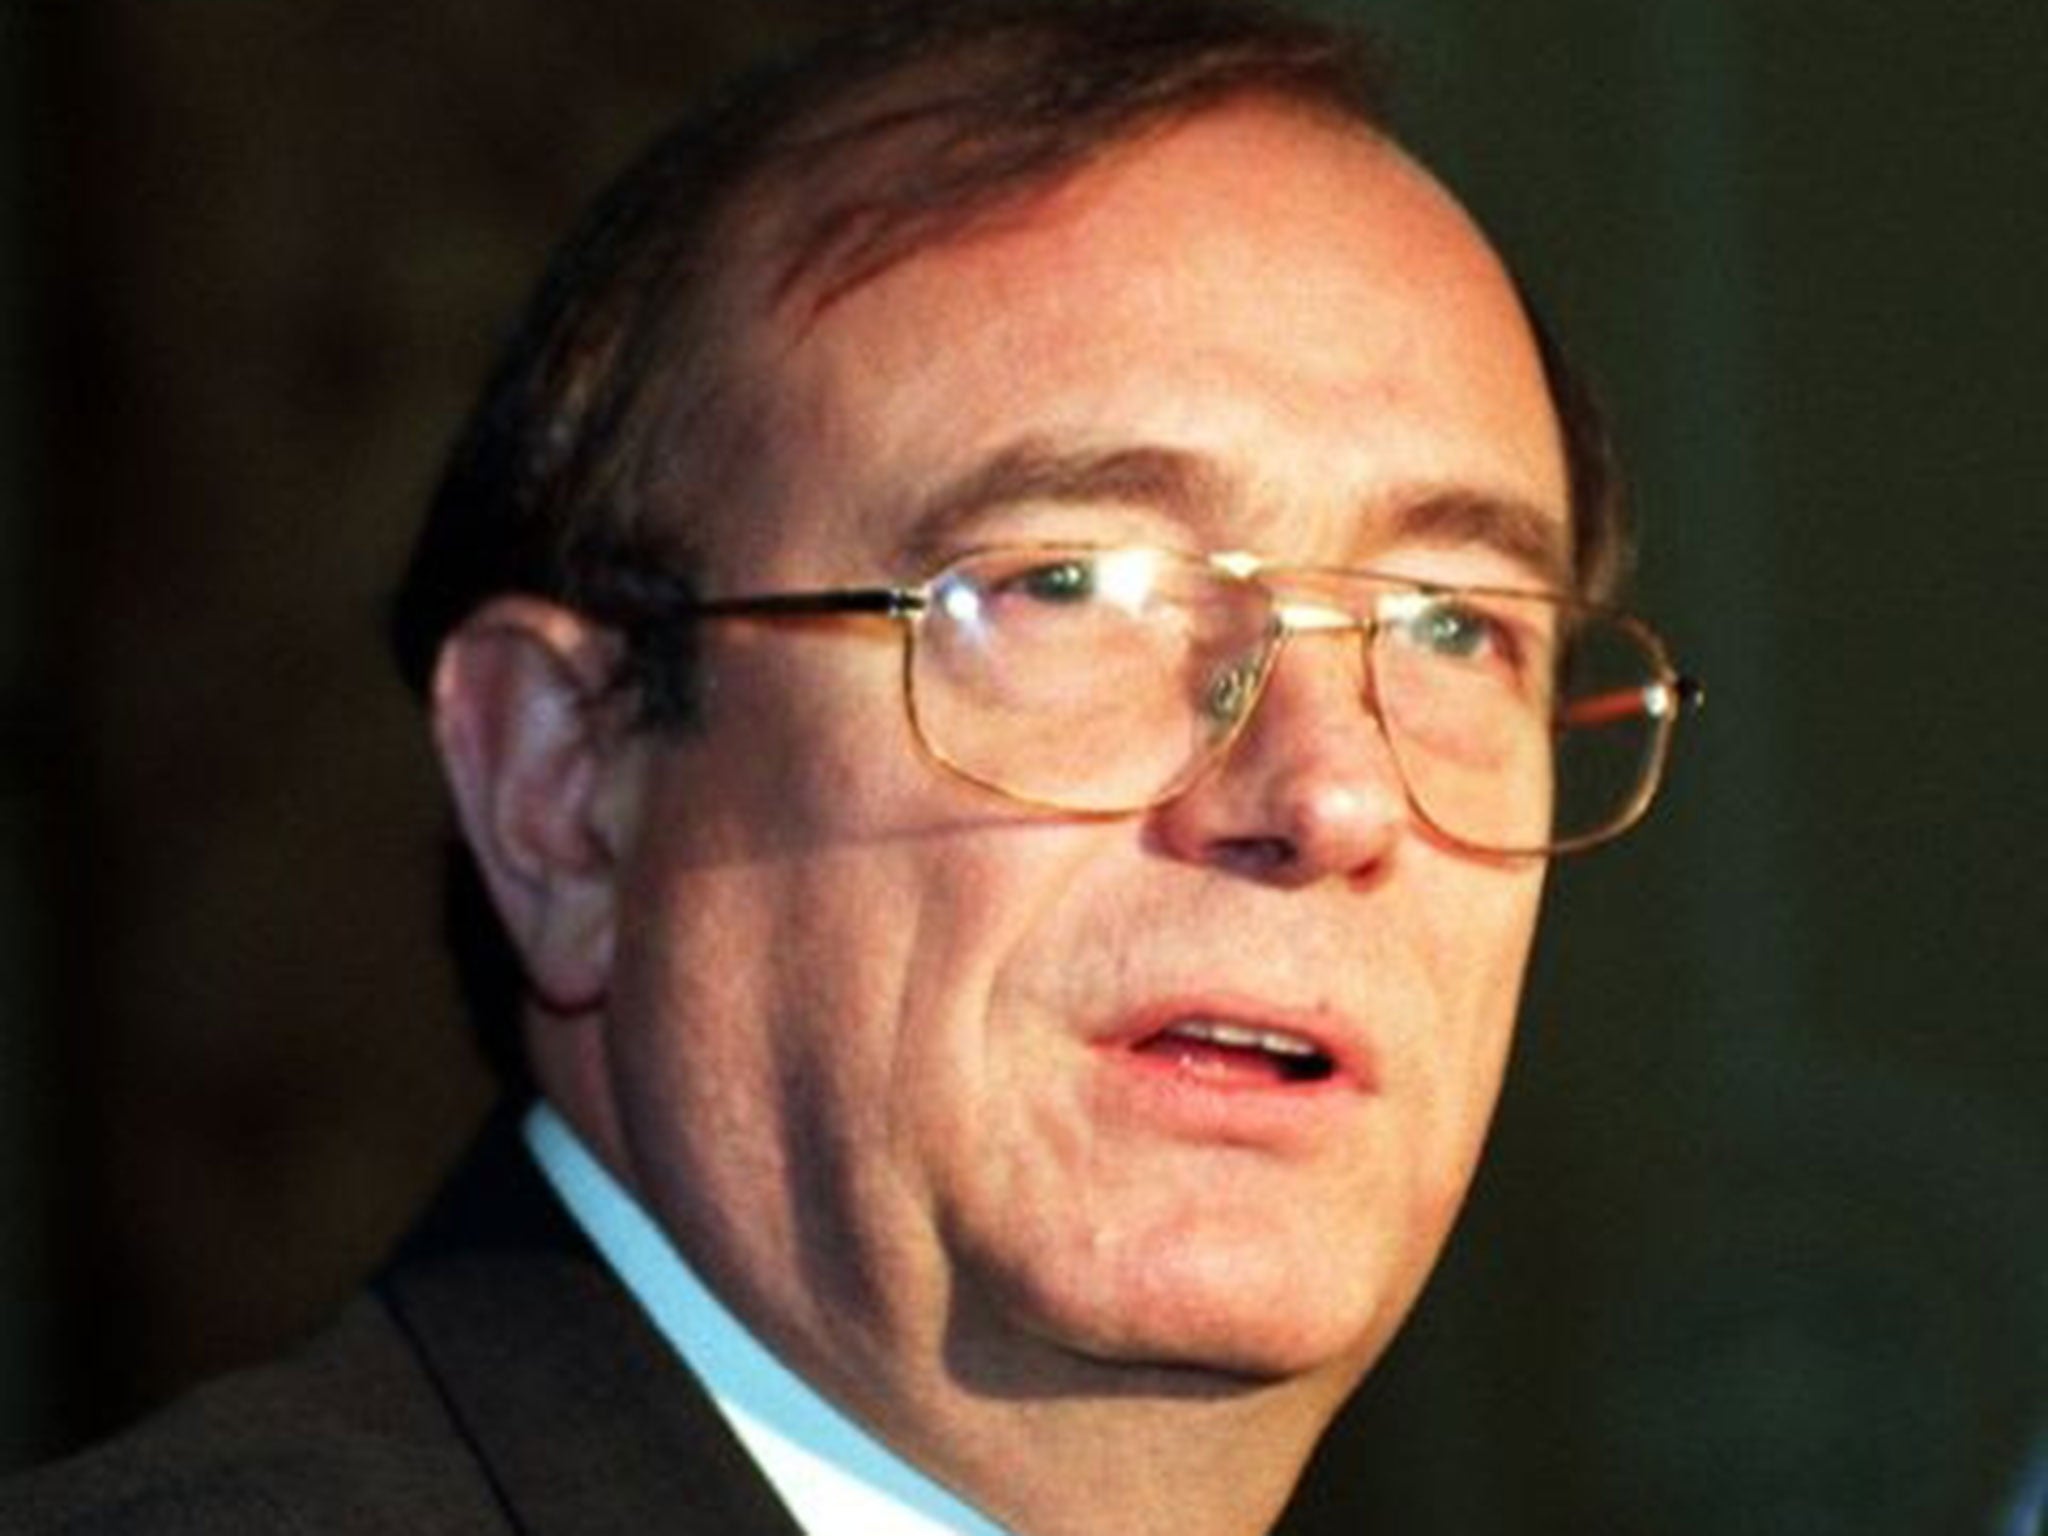 Lord Sewel, who has resigned as Lords Deputy Speaker